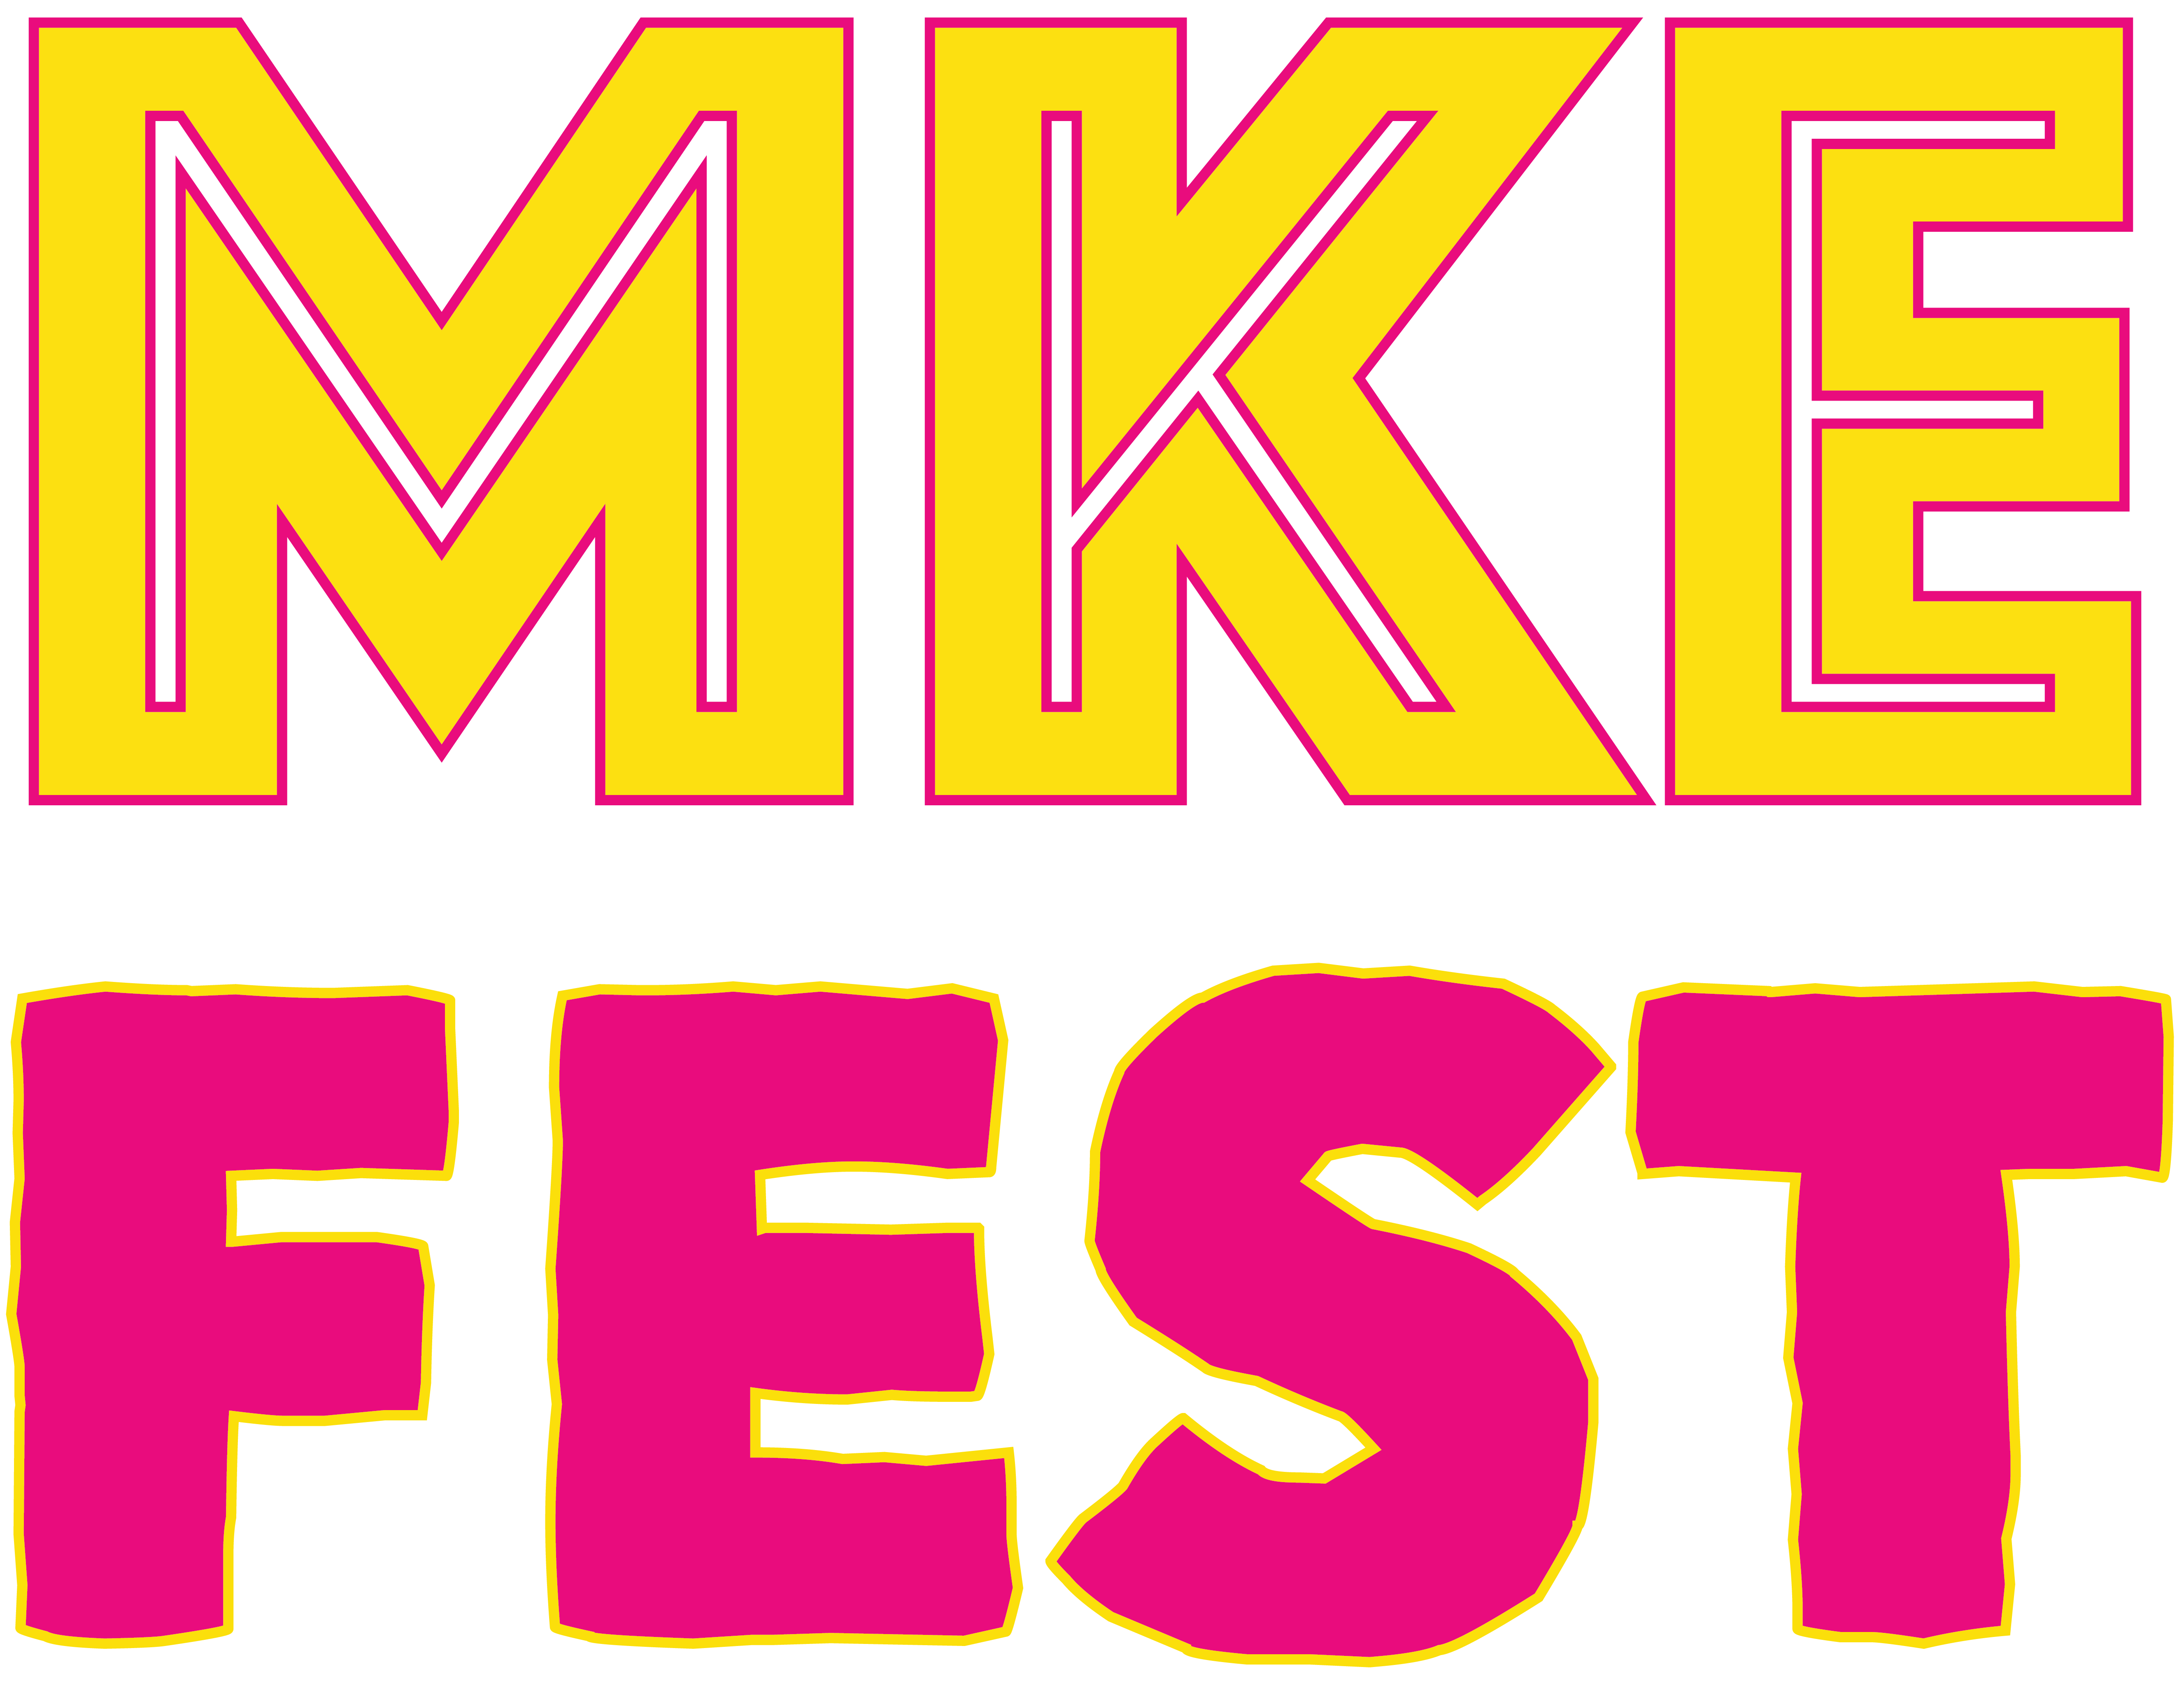 MKEfest